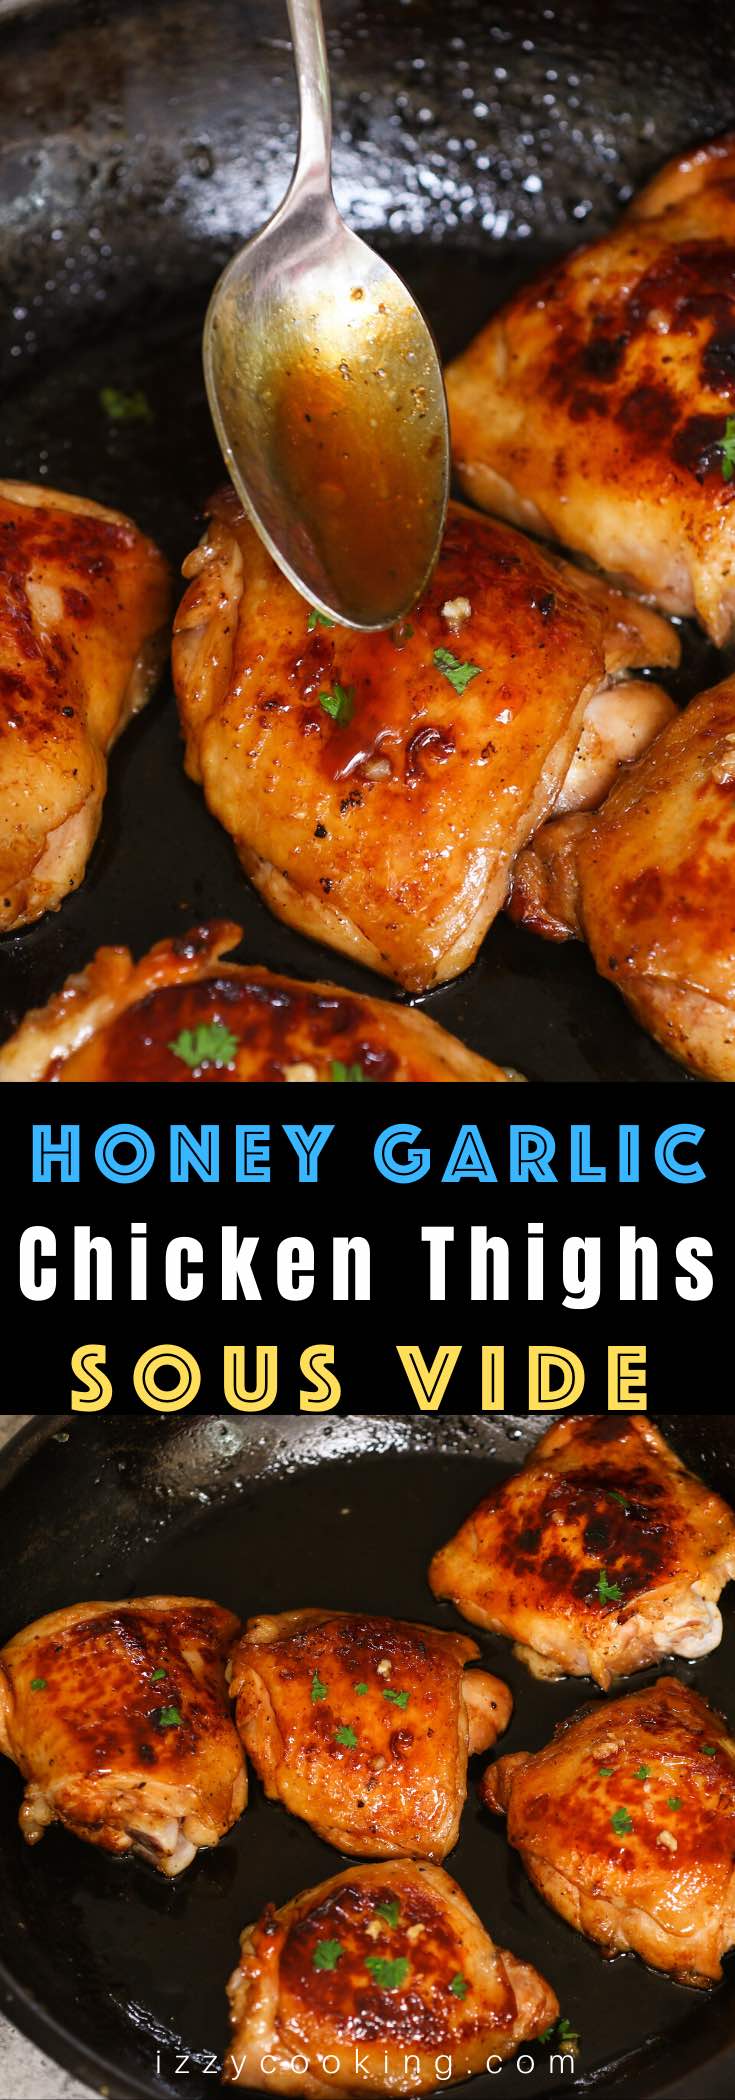 Honey Garlic Sous Vide Chicken Thighs are super juicy, tender and full of flavor. Sous vide method cooks these chicken thighs to the perfect doneness, and then a quick sear produces the amazing crispy skin on the outside. With tips on how to cook from fresh or frozen. #SousVideChickenThighs #SousVideChicken